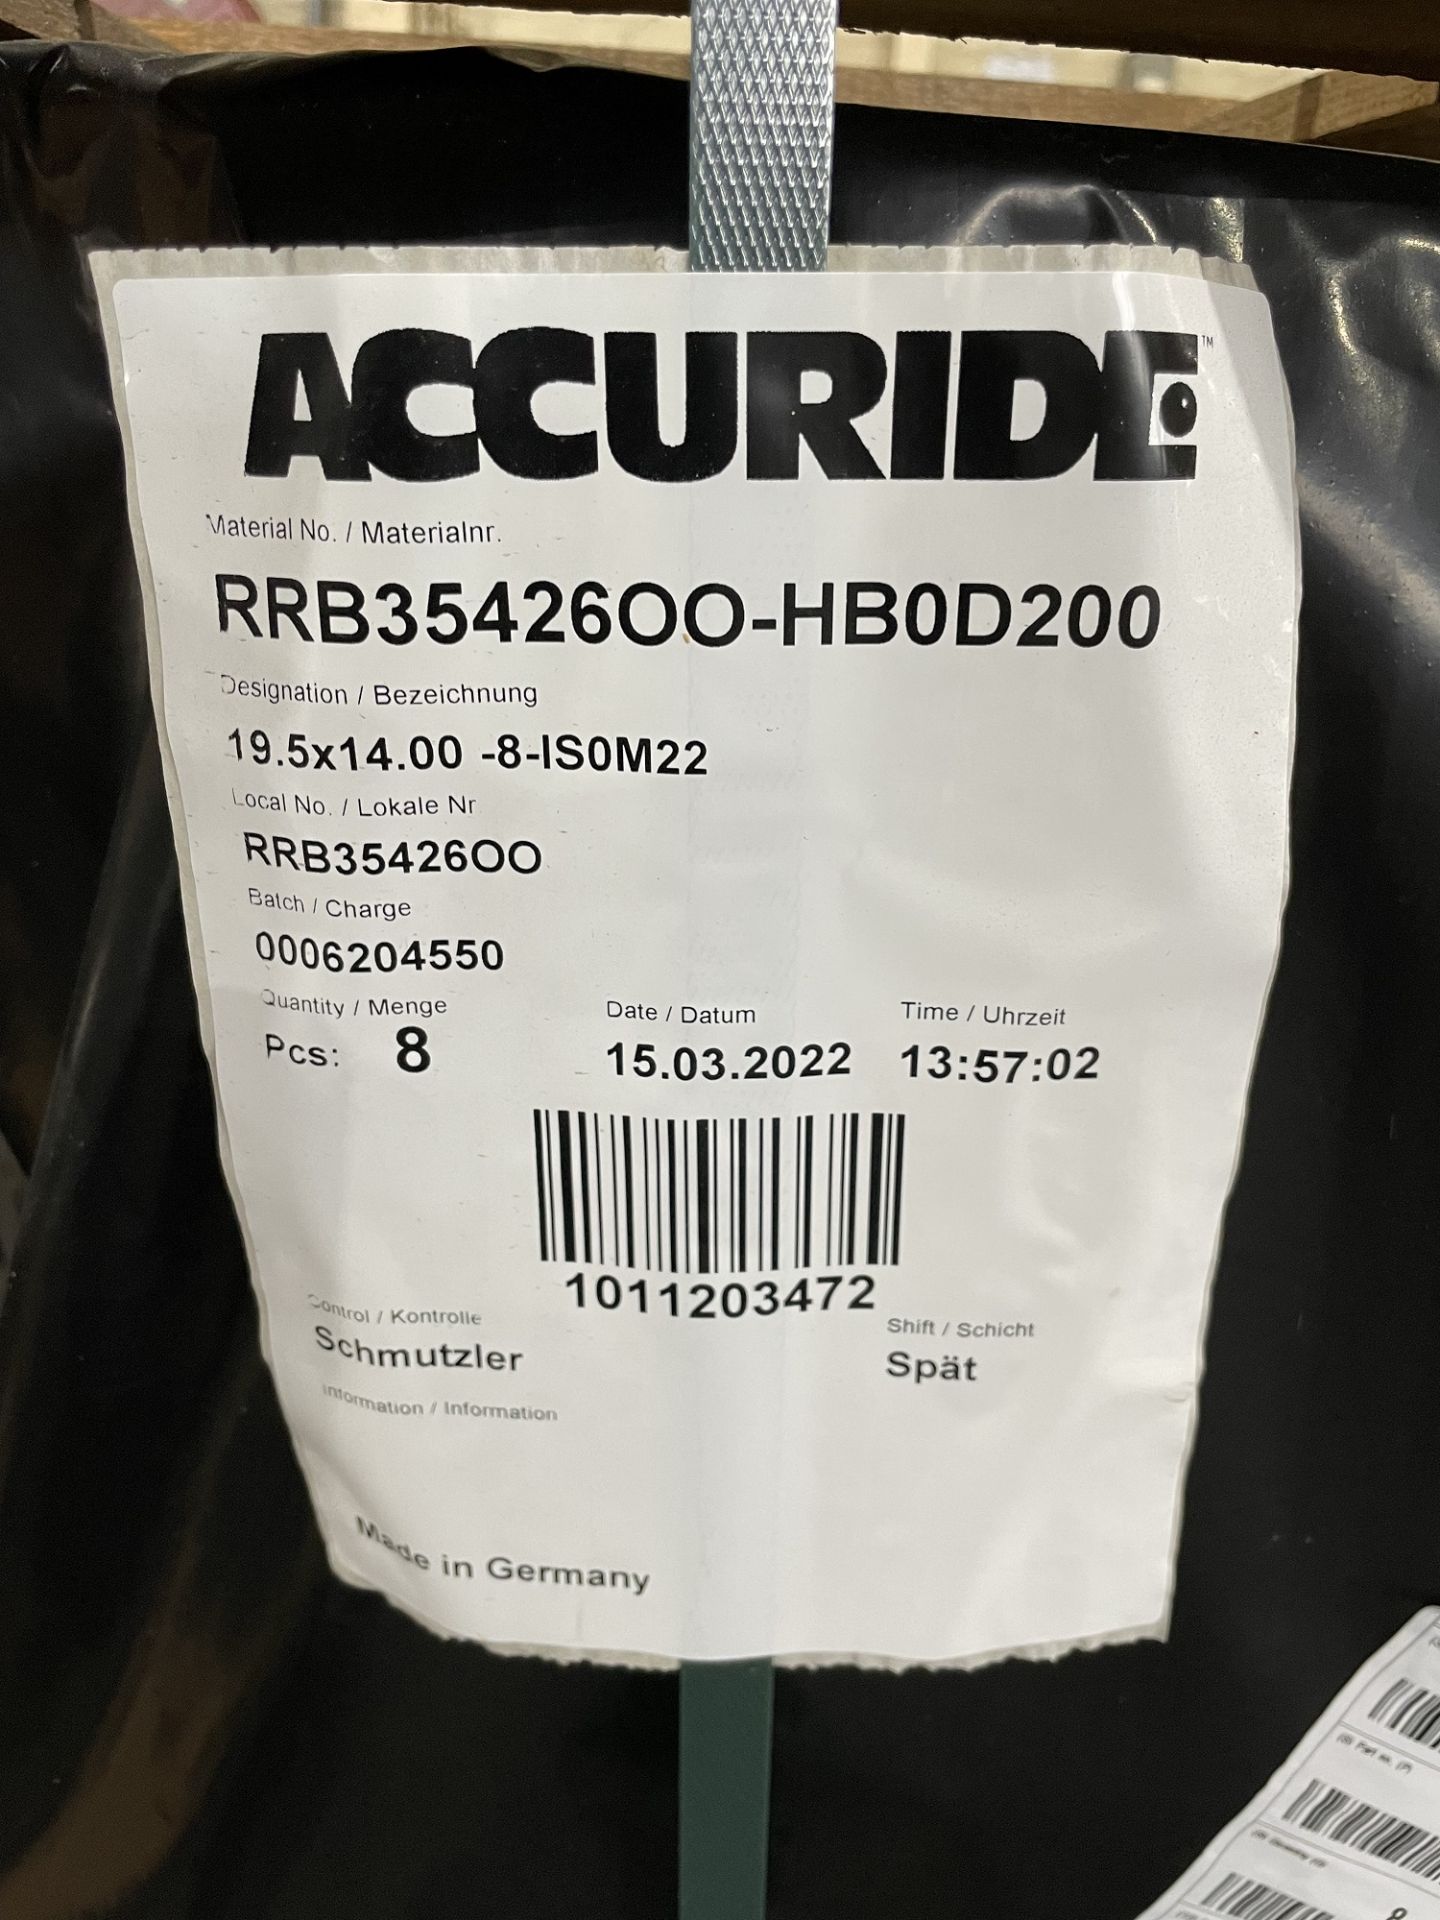 40 Accuride 19.5 x 14.00-8-IS0M22 RRB3542600-HB0D200 Wheels (new). - Image 3 of 3